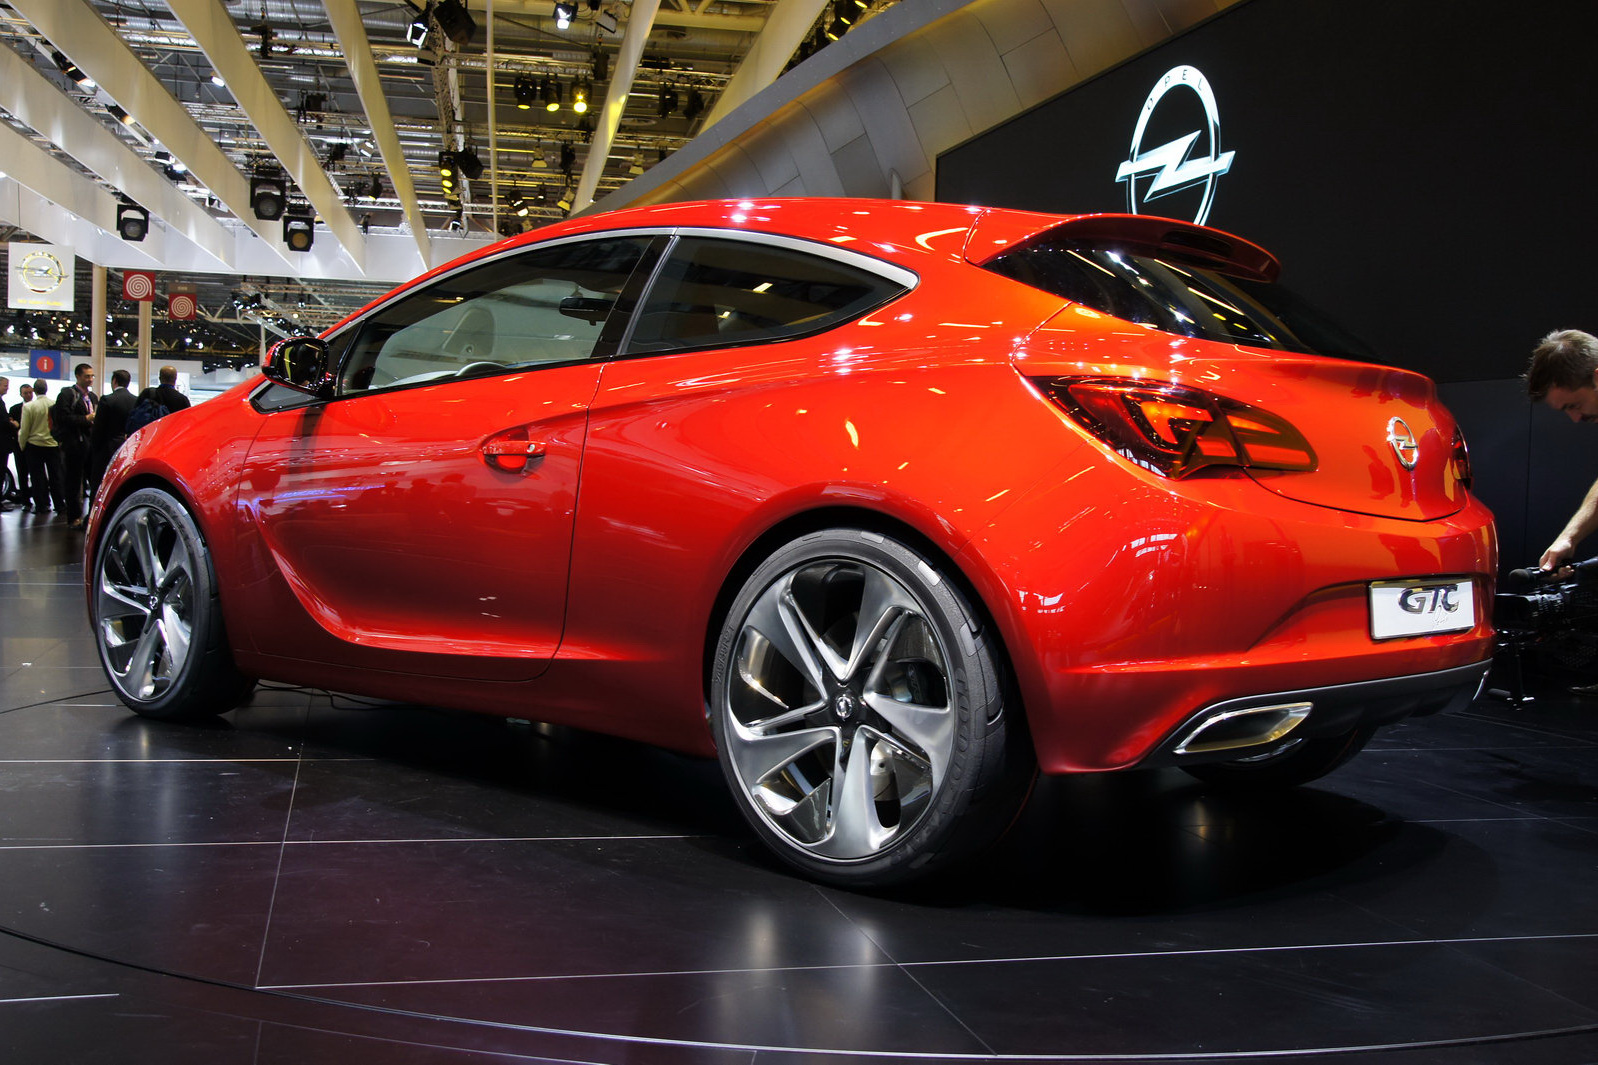 New Opel Astra GTC Sport Hatch Appears on Facebook Completely Undisguised